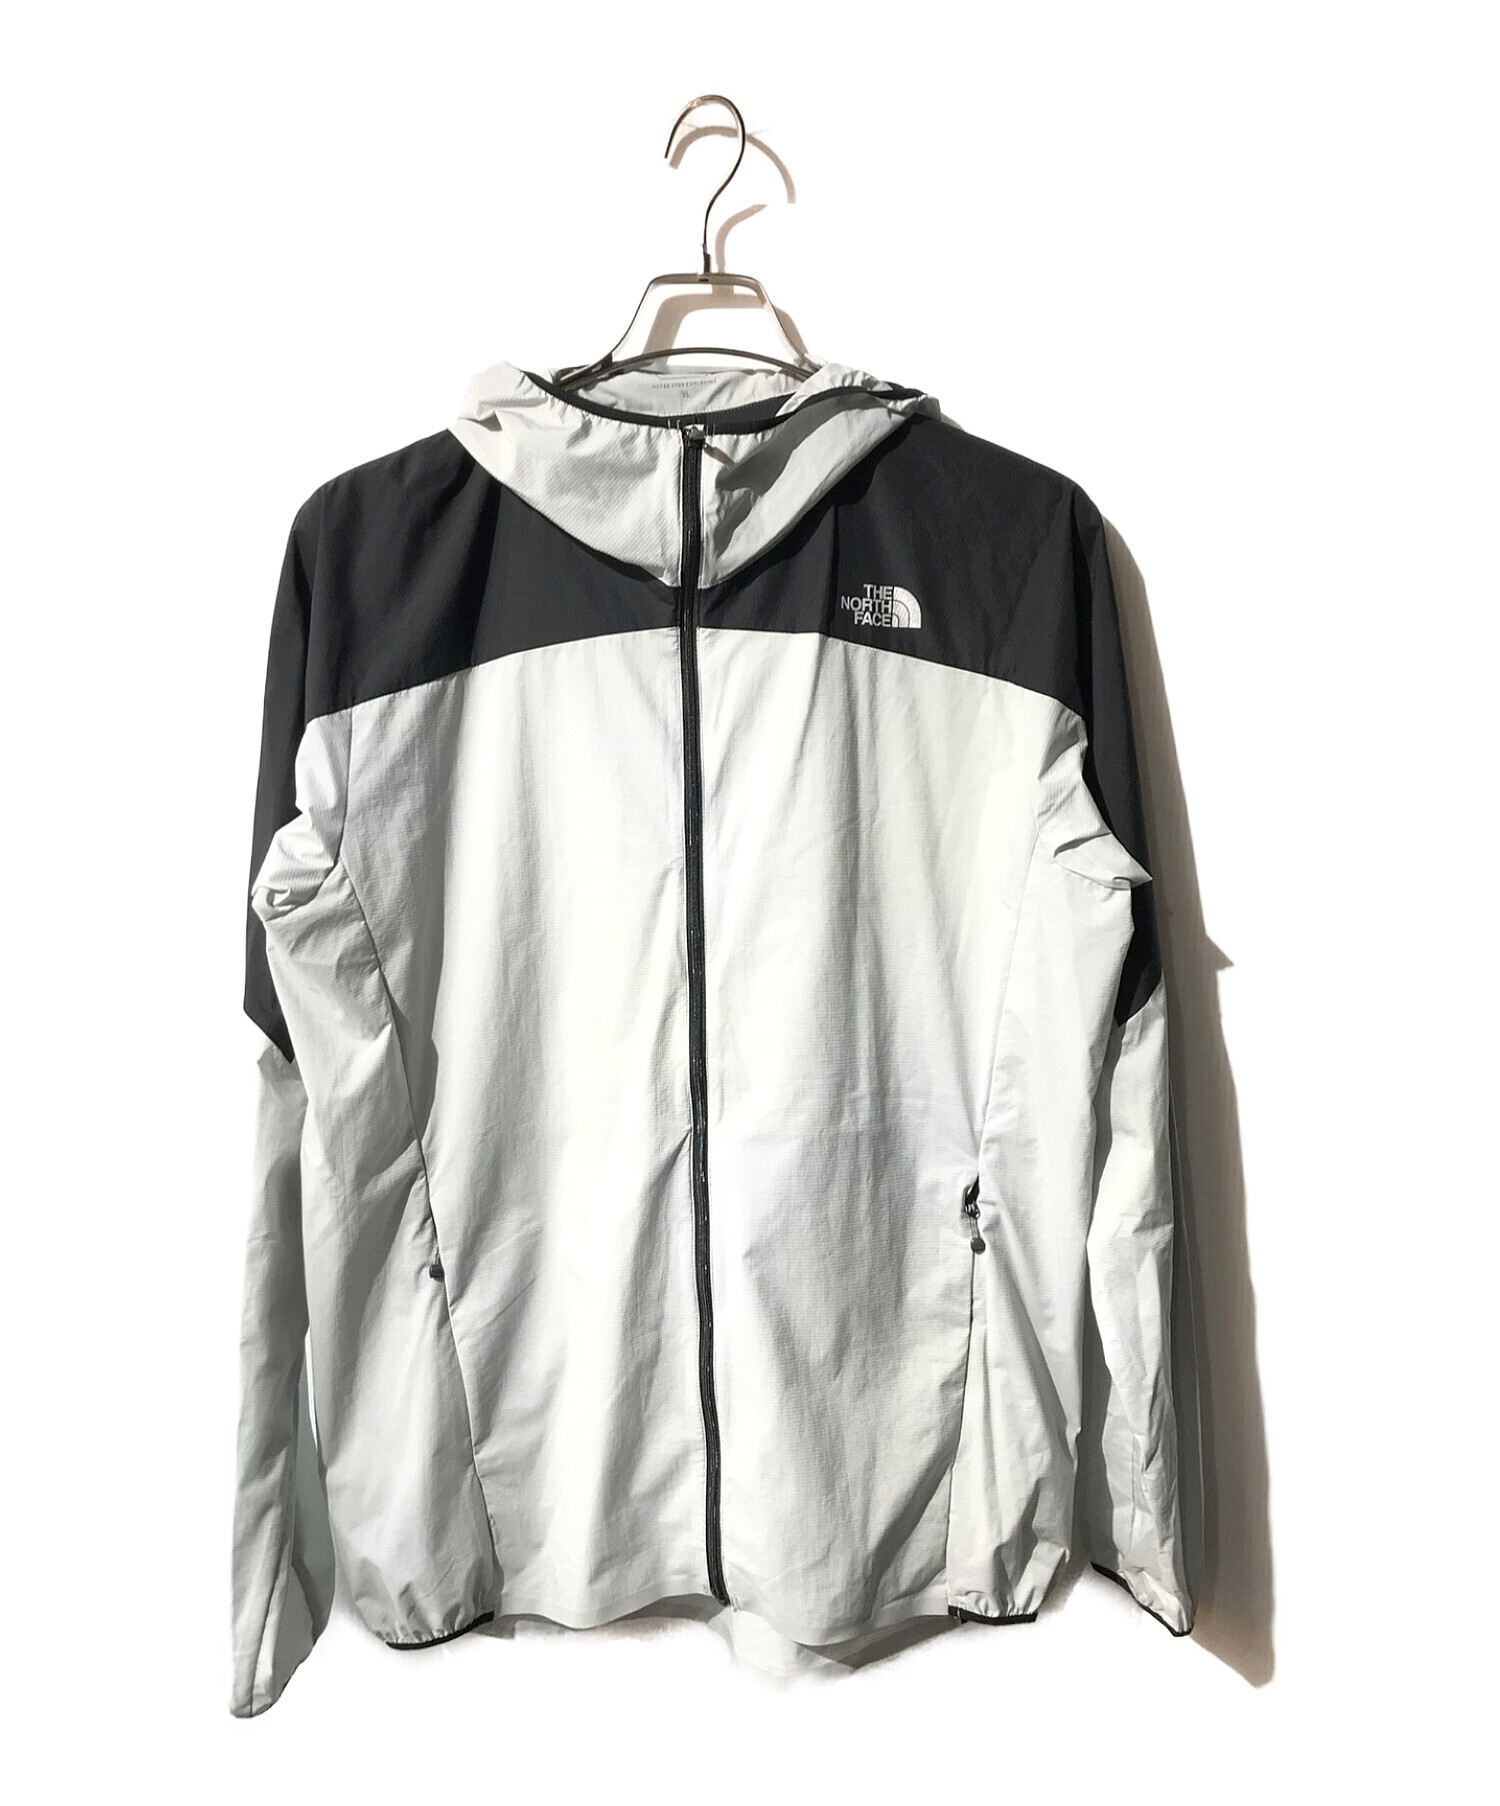 THE NORTH FACE SWALLOWTAILVENT HOODIE XL